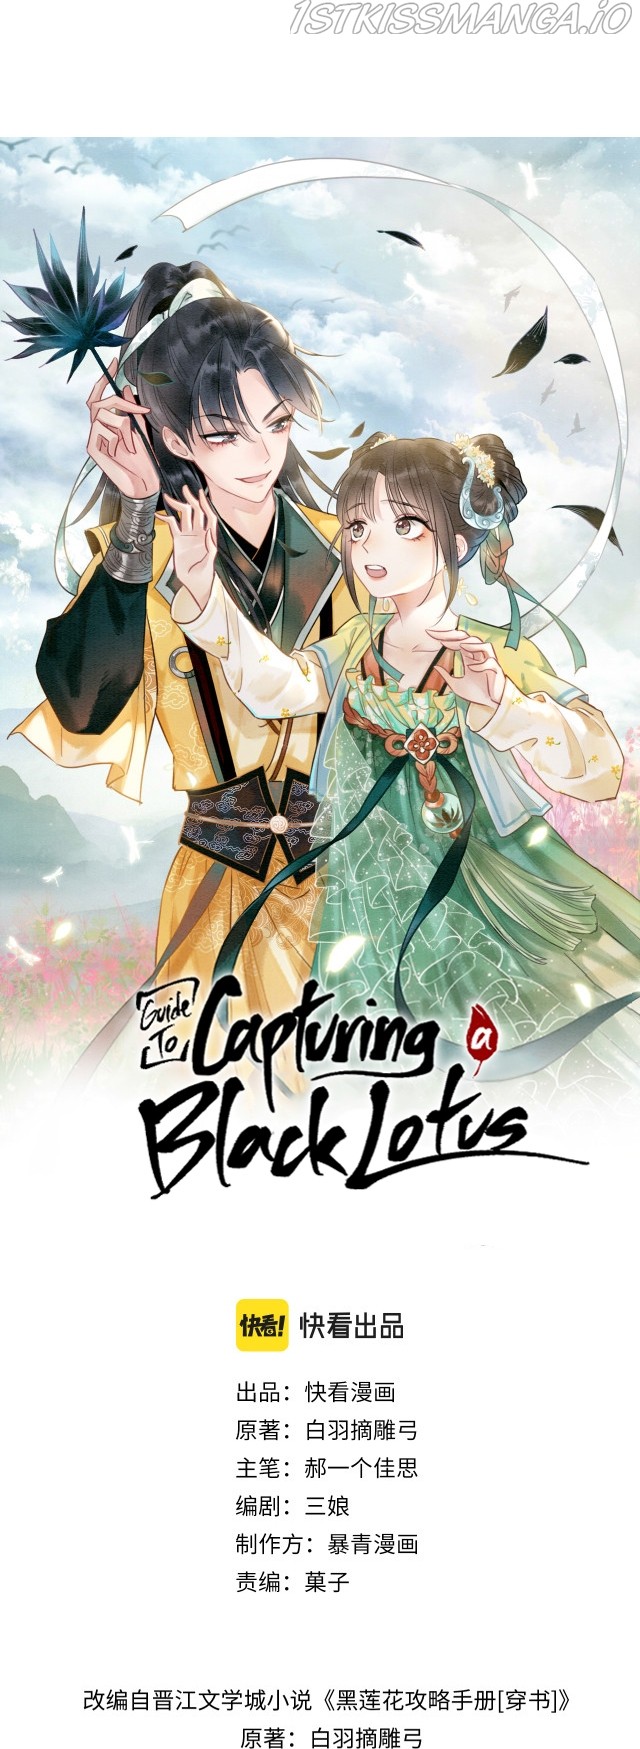 The Guide To Capturing A Black Lotus - Page 2